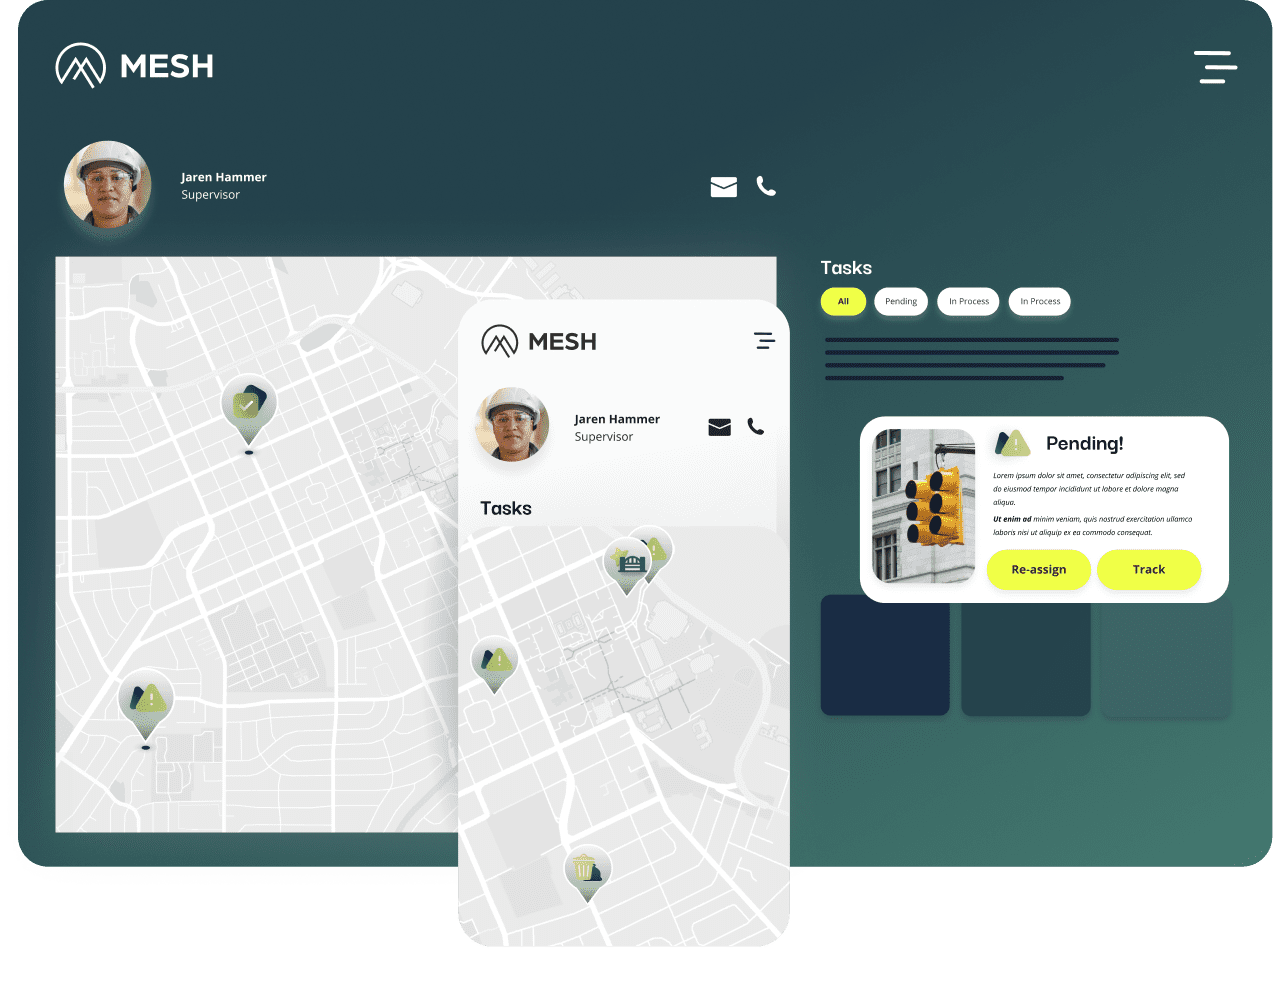 Mesh: Performance management platform that fits the way you work